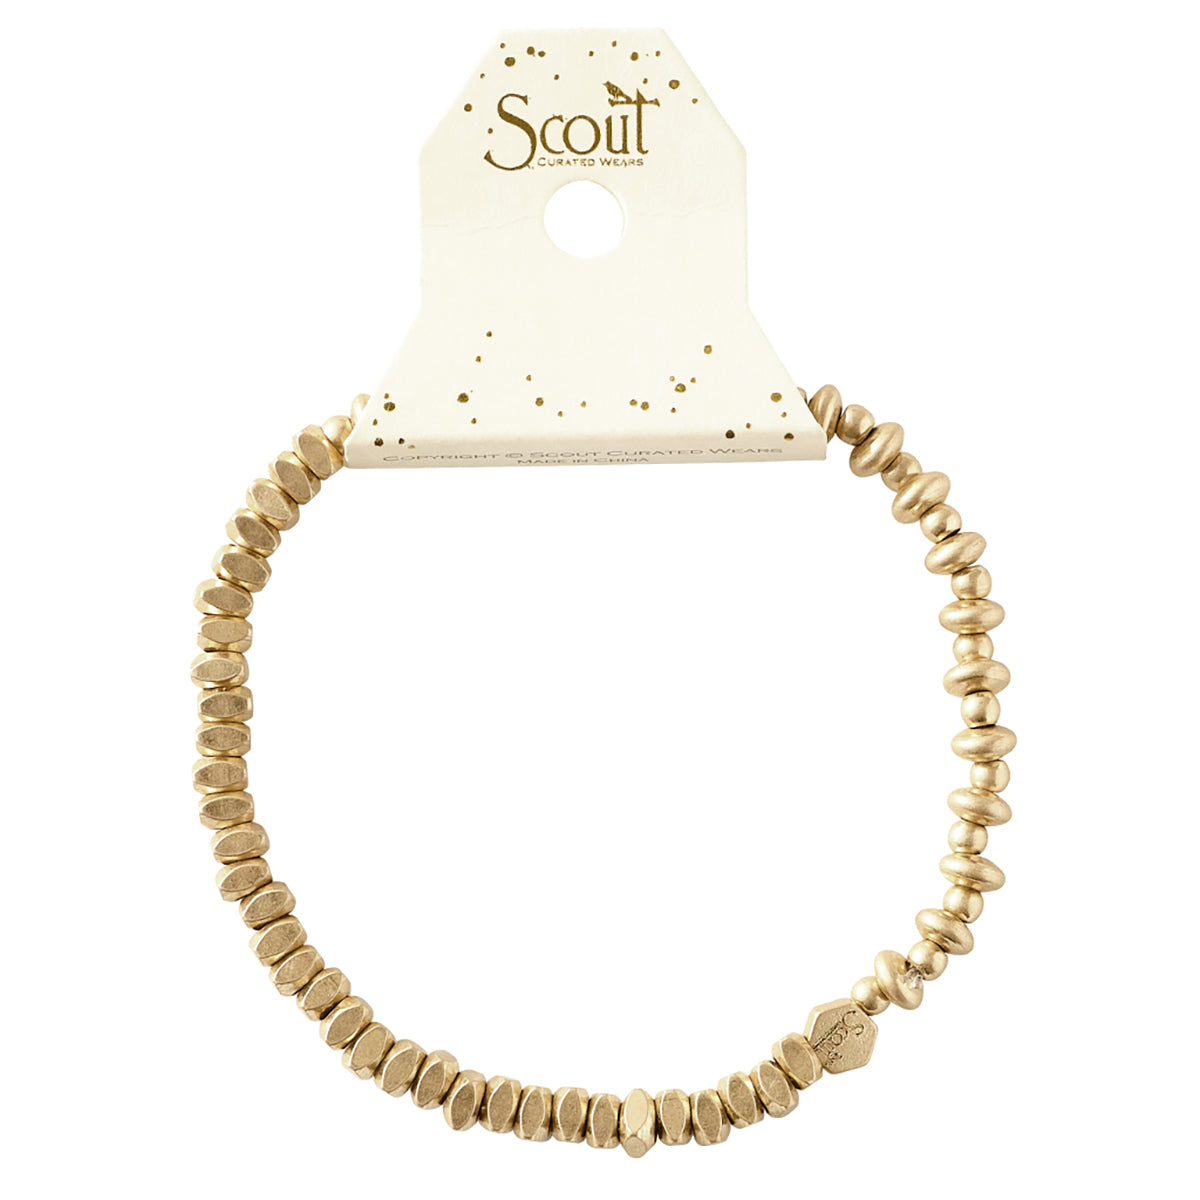 Scout Curated Wears Scout Curated Wears Mini Metal Stacking Bracelet Mixed Beads Gold